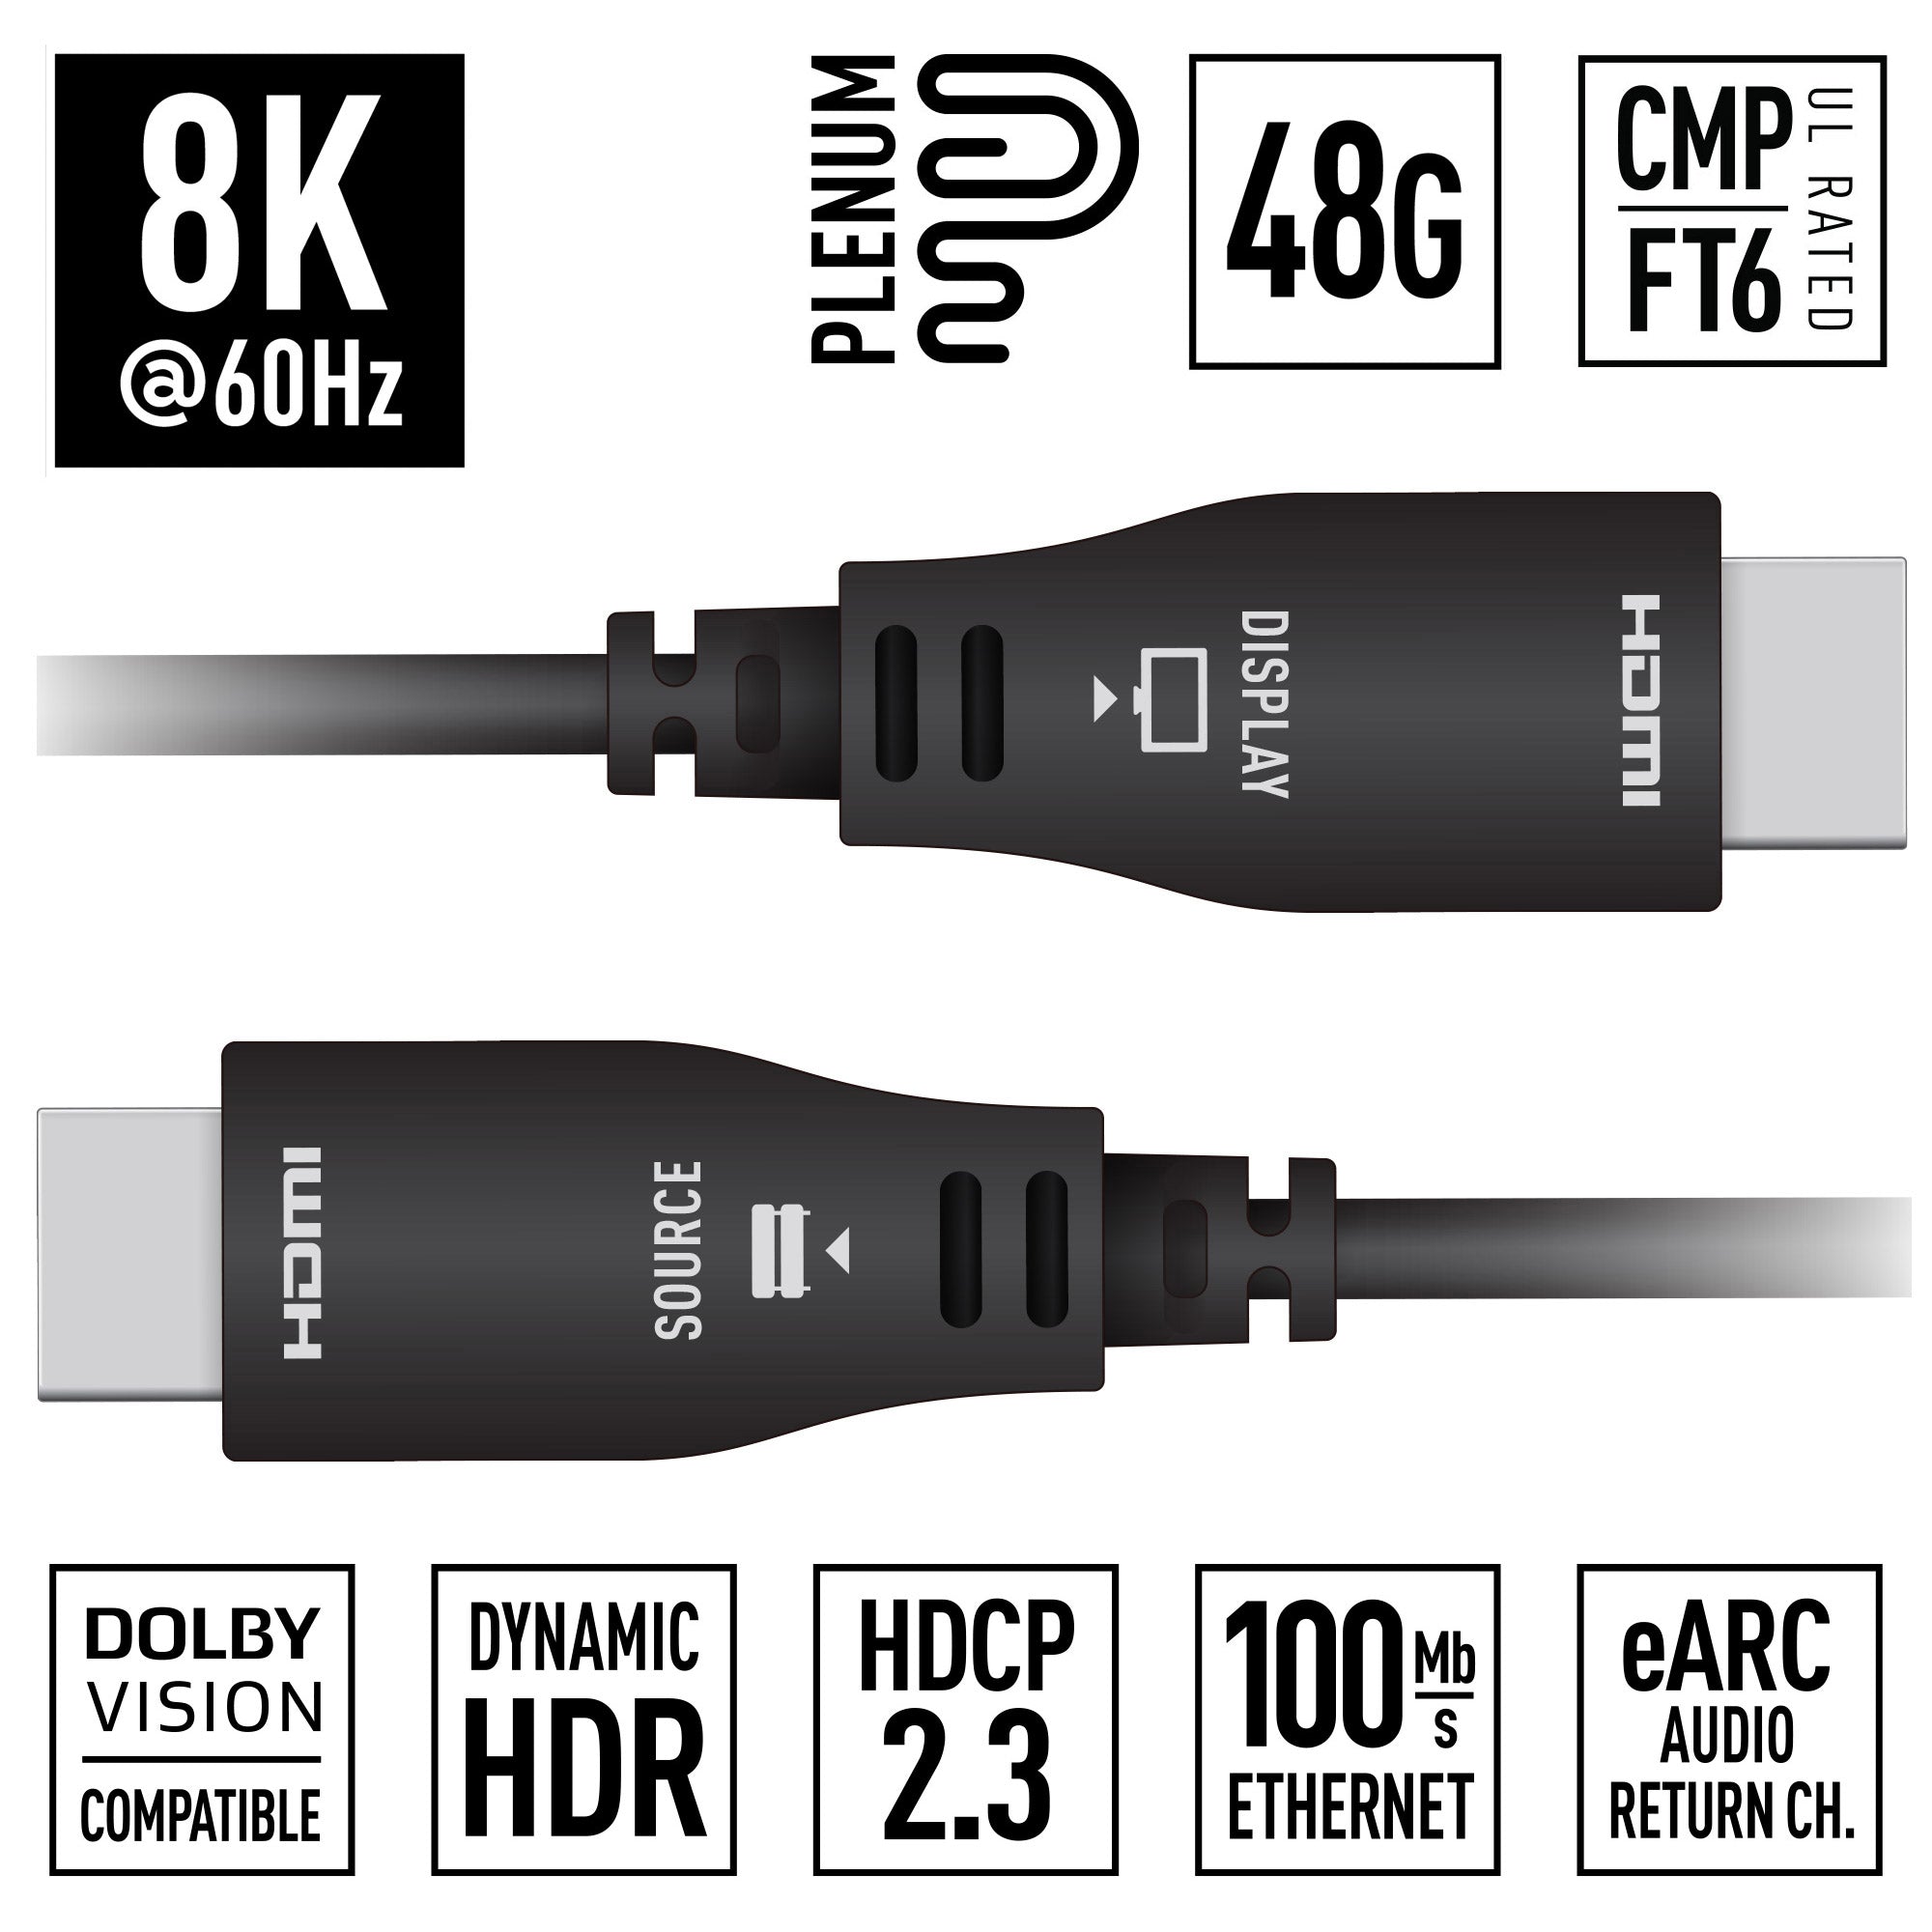 Key Digital 66FT (20M) 8K/48G Plenum Hybrid Fiber Optic Ultra High Speed HDMI Cable. Supports Dynamic HDR, Dolby® Vision, HDCP2.3, eARC, CMP / FT6 UL Rated - KD-AOCH66P